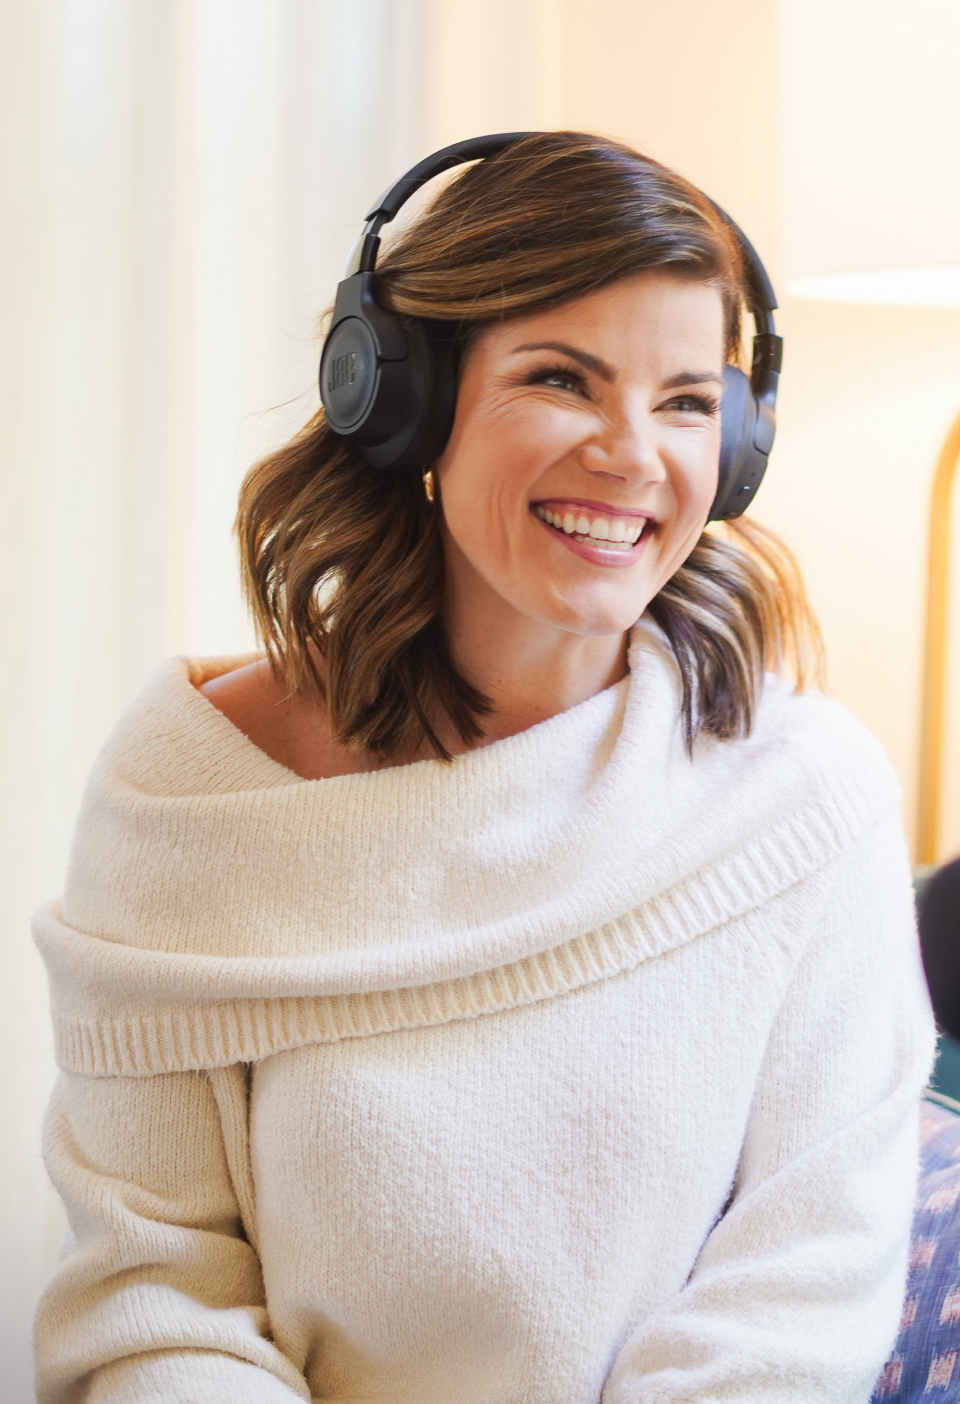 A smiling woman wearing an off-the-shoulder sweater and headphones.